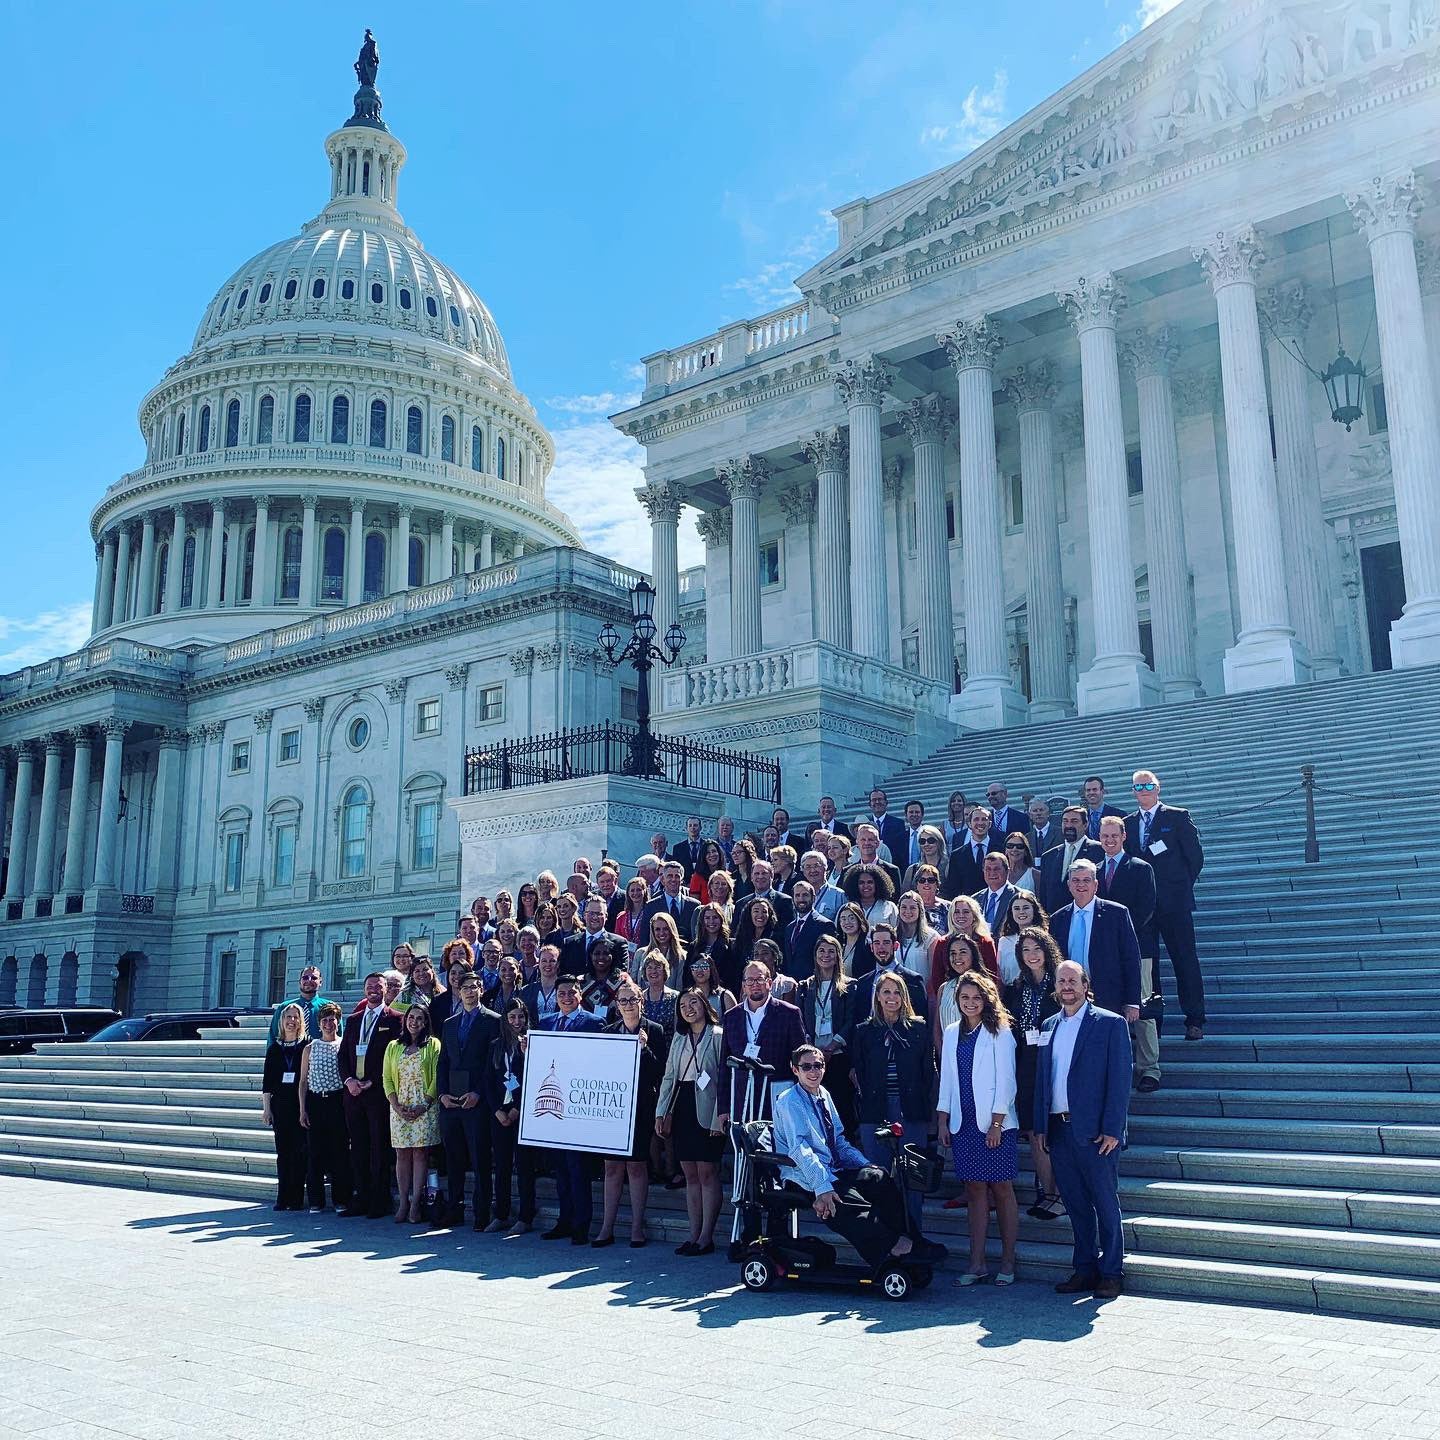 Group photo of the participants on the steps of the U.S. Capitol Building at the 2019 Colorado Capital Conference